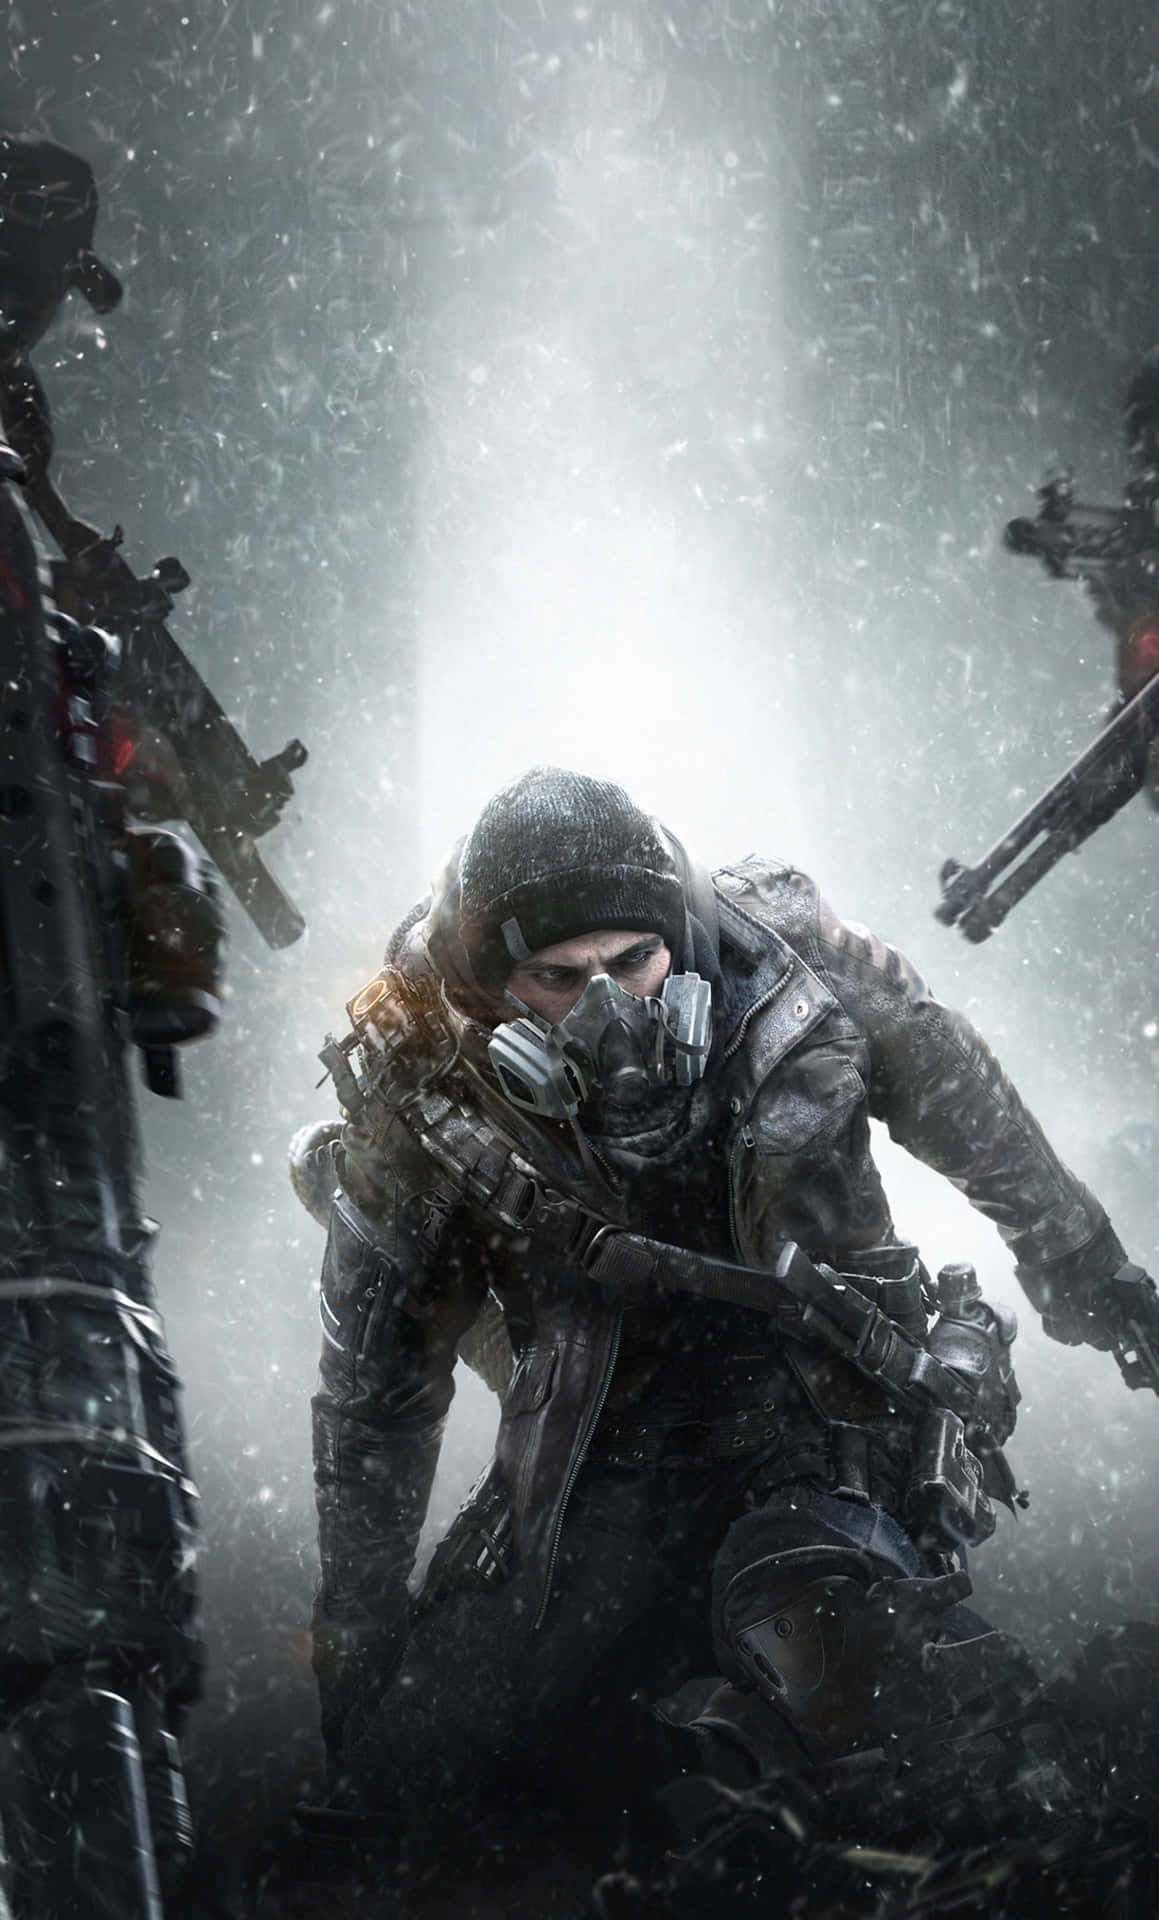 Aaronmed Gasmask Android, The Division Bakgrund.